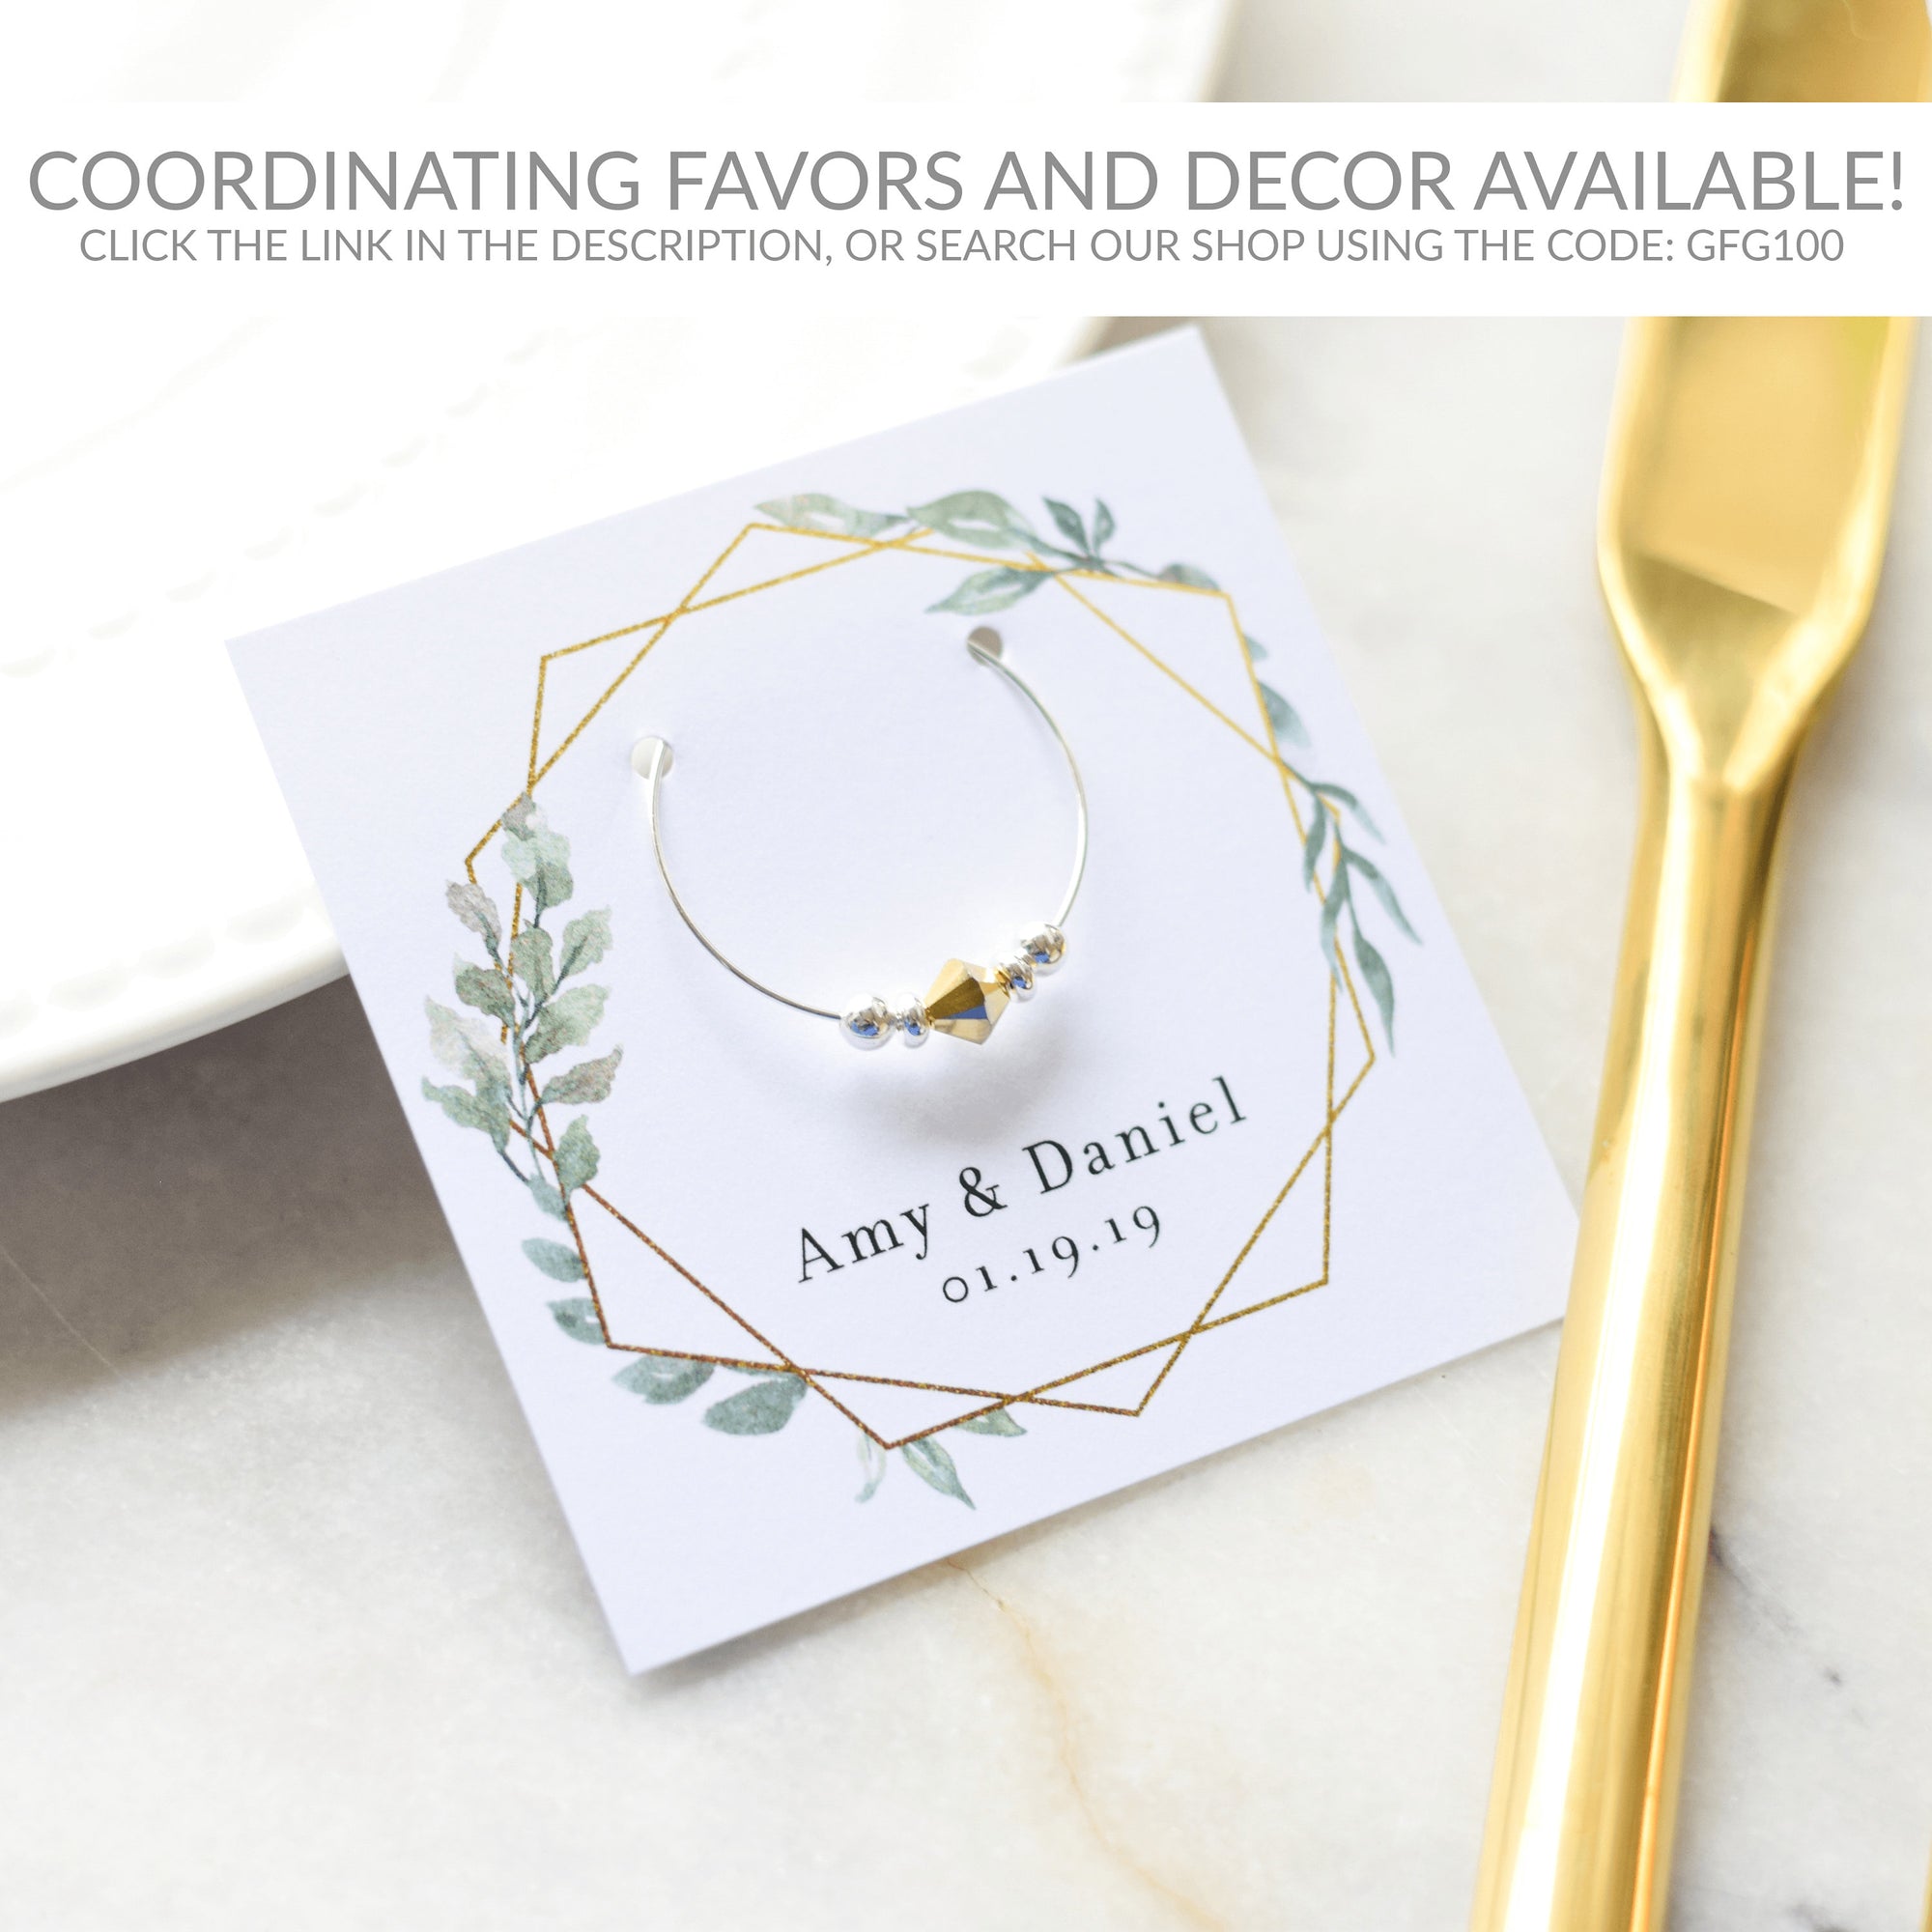 Baptism Favor Tags Printable Template, Greenery Favor Tags, Baptism Thank You, Round Square or Rectangle, Editable DIGITAL DOWNLOAD - GFG100